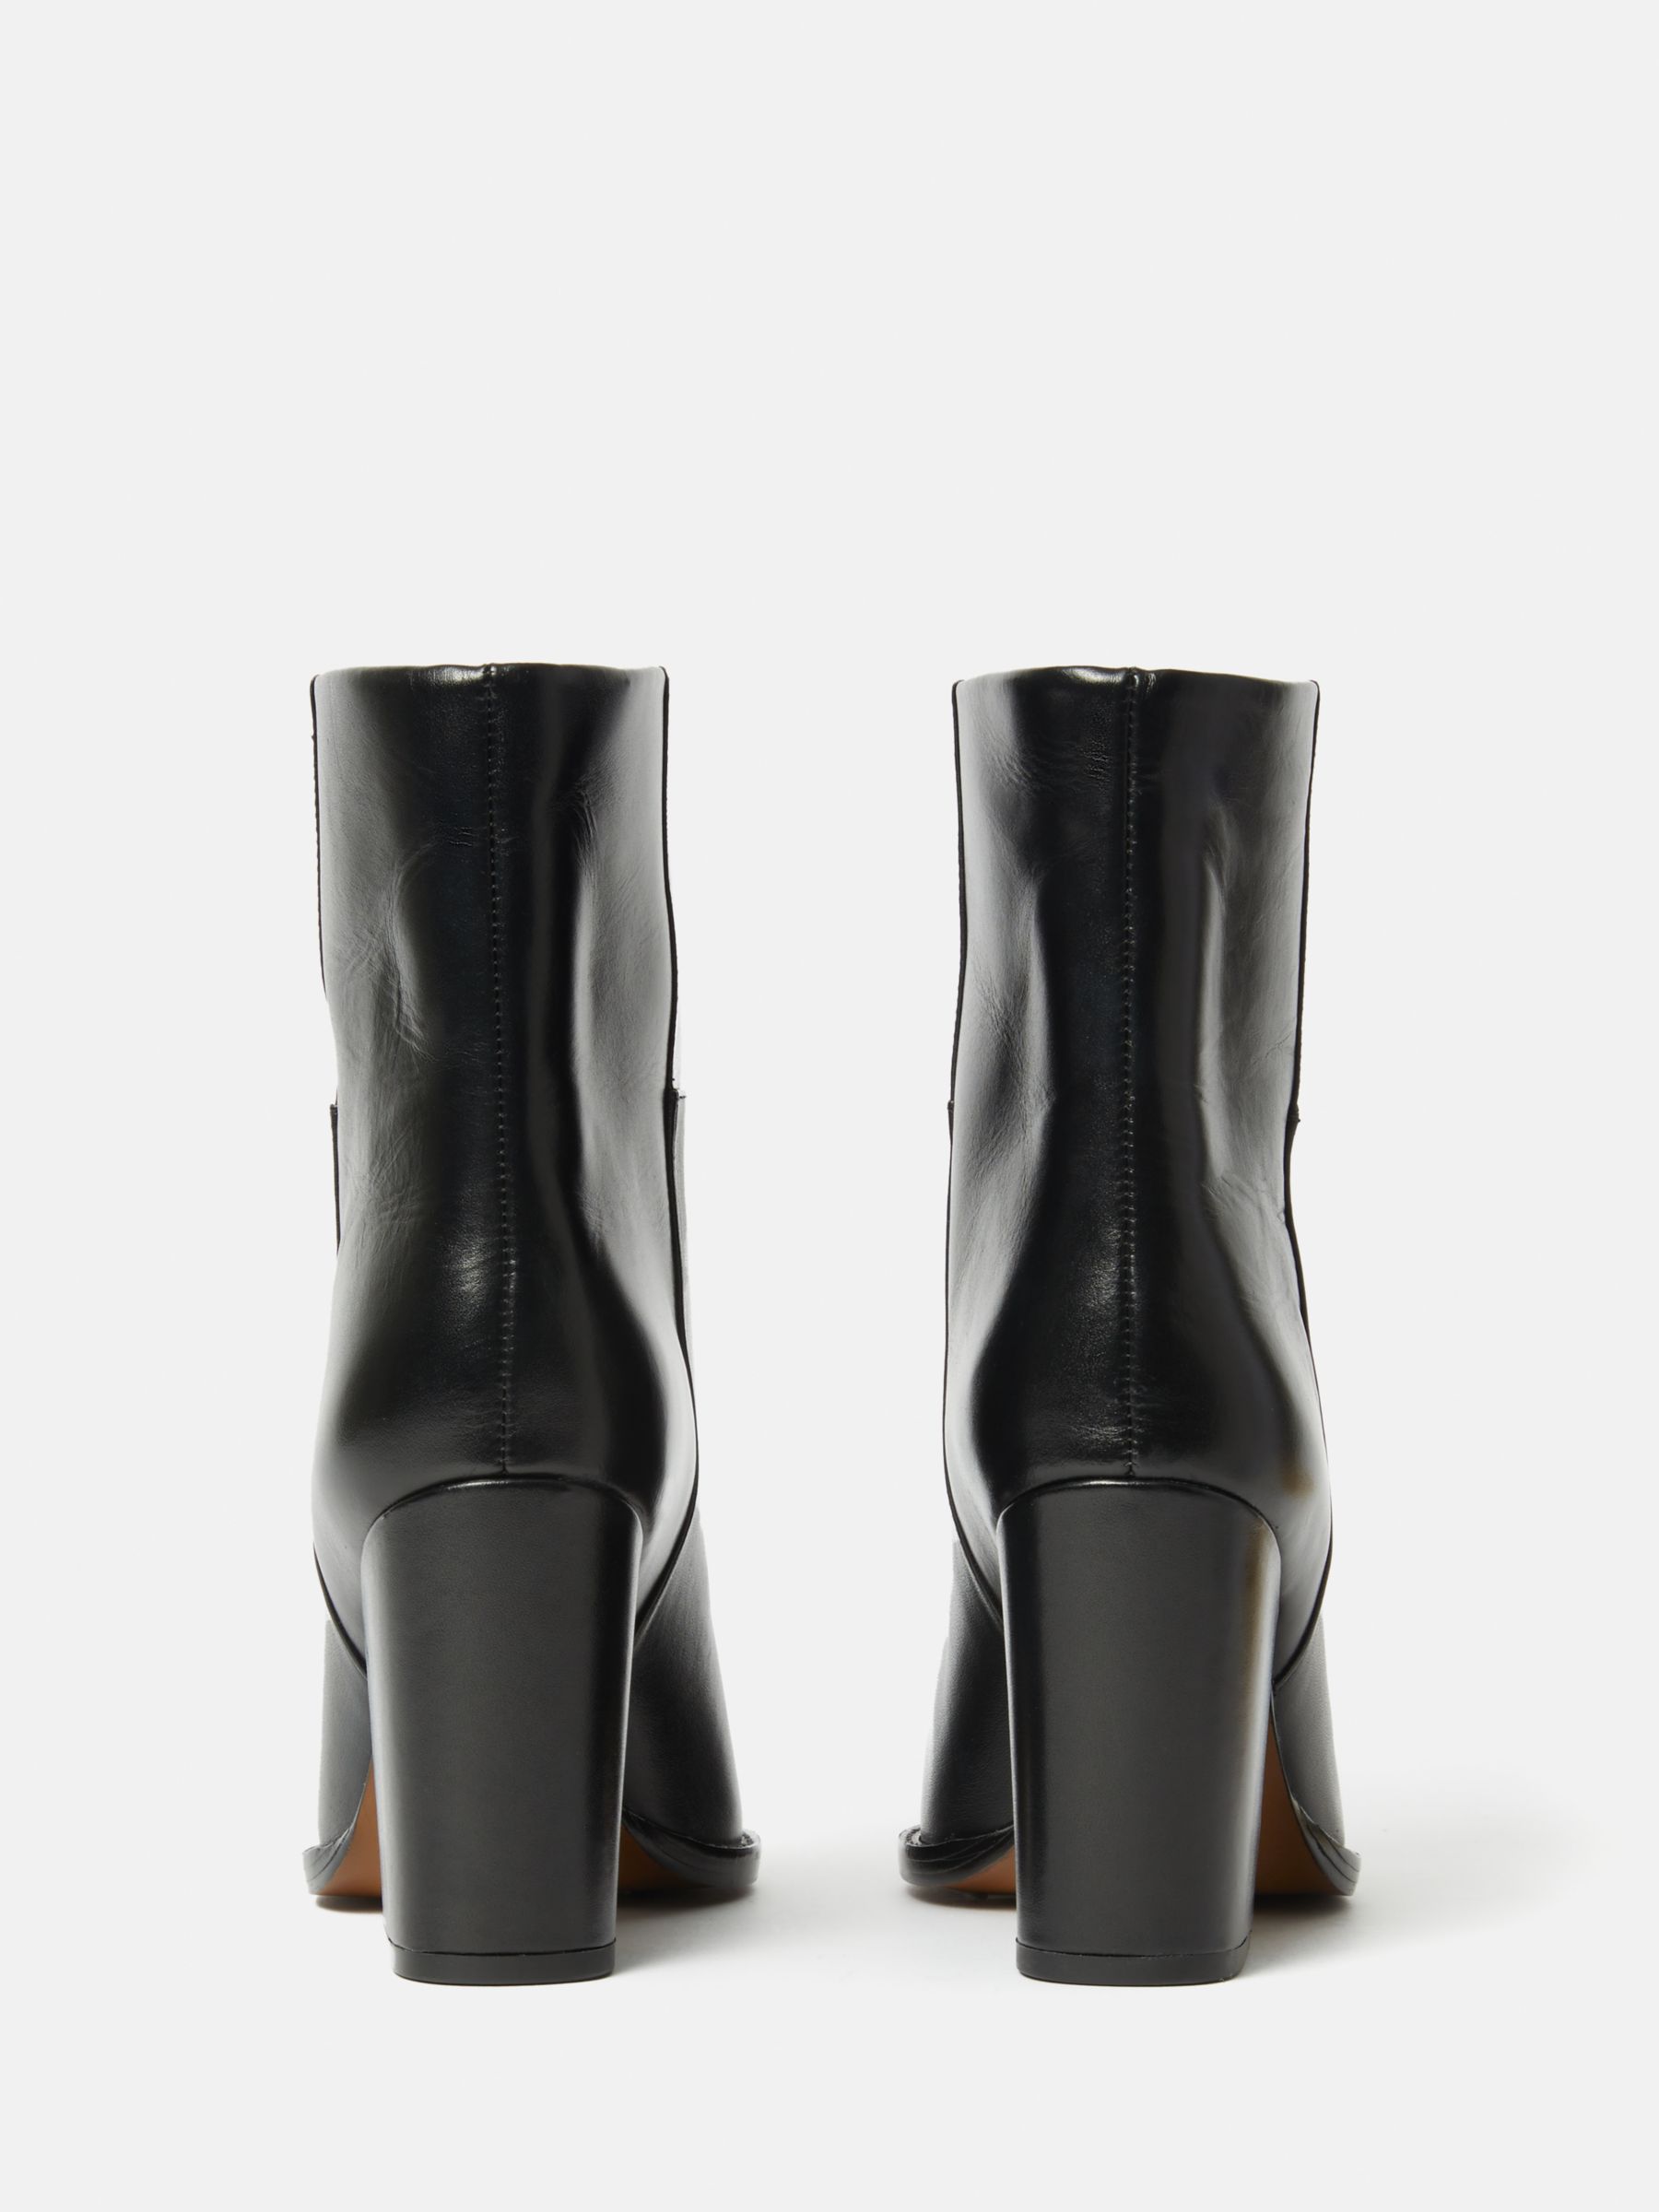 Jigsaw Connaught High Block Heel Ankle Boots, Black at John Lewis ...